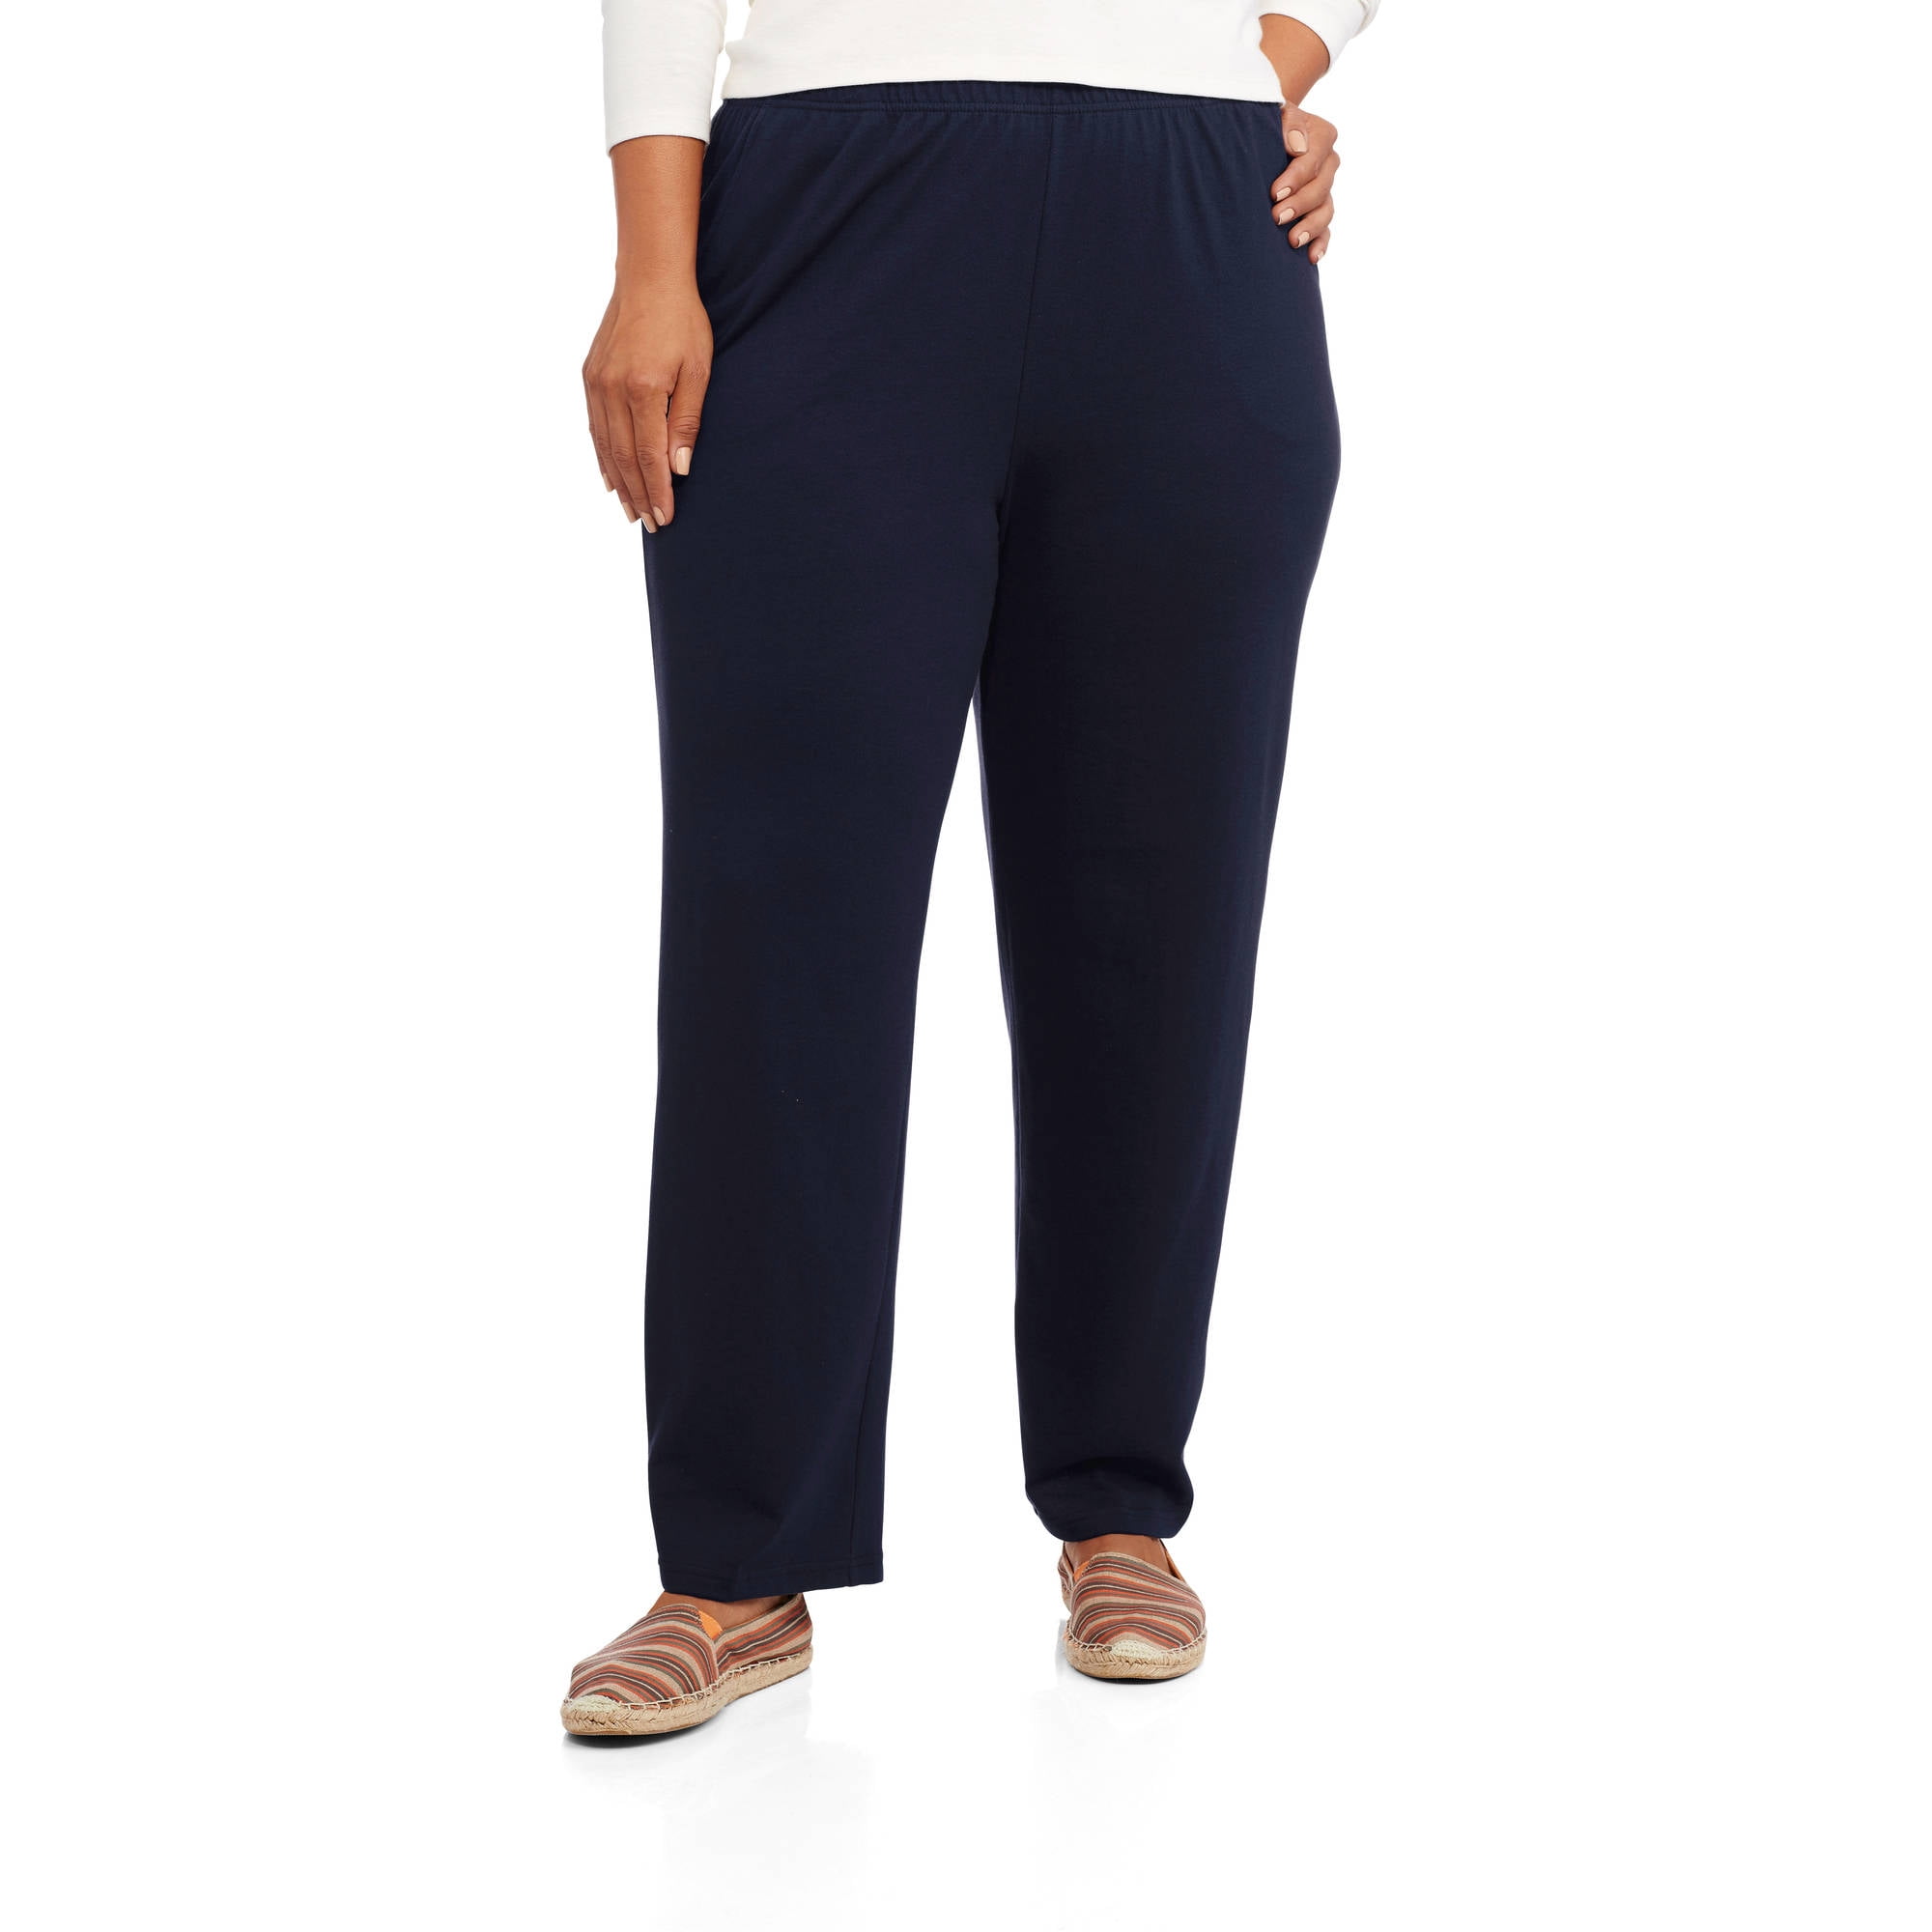 Women's Plus Size Knit Pull On Pants, Available in Regular and Petite ...